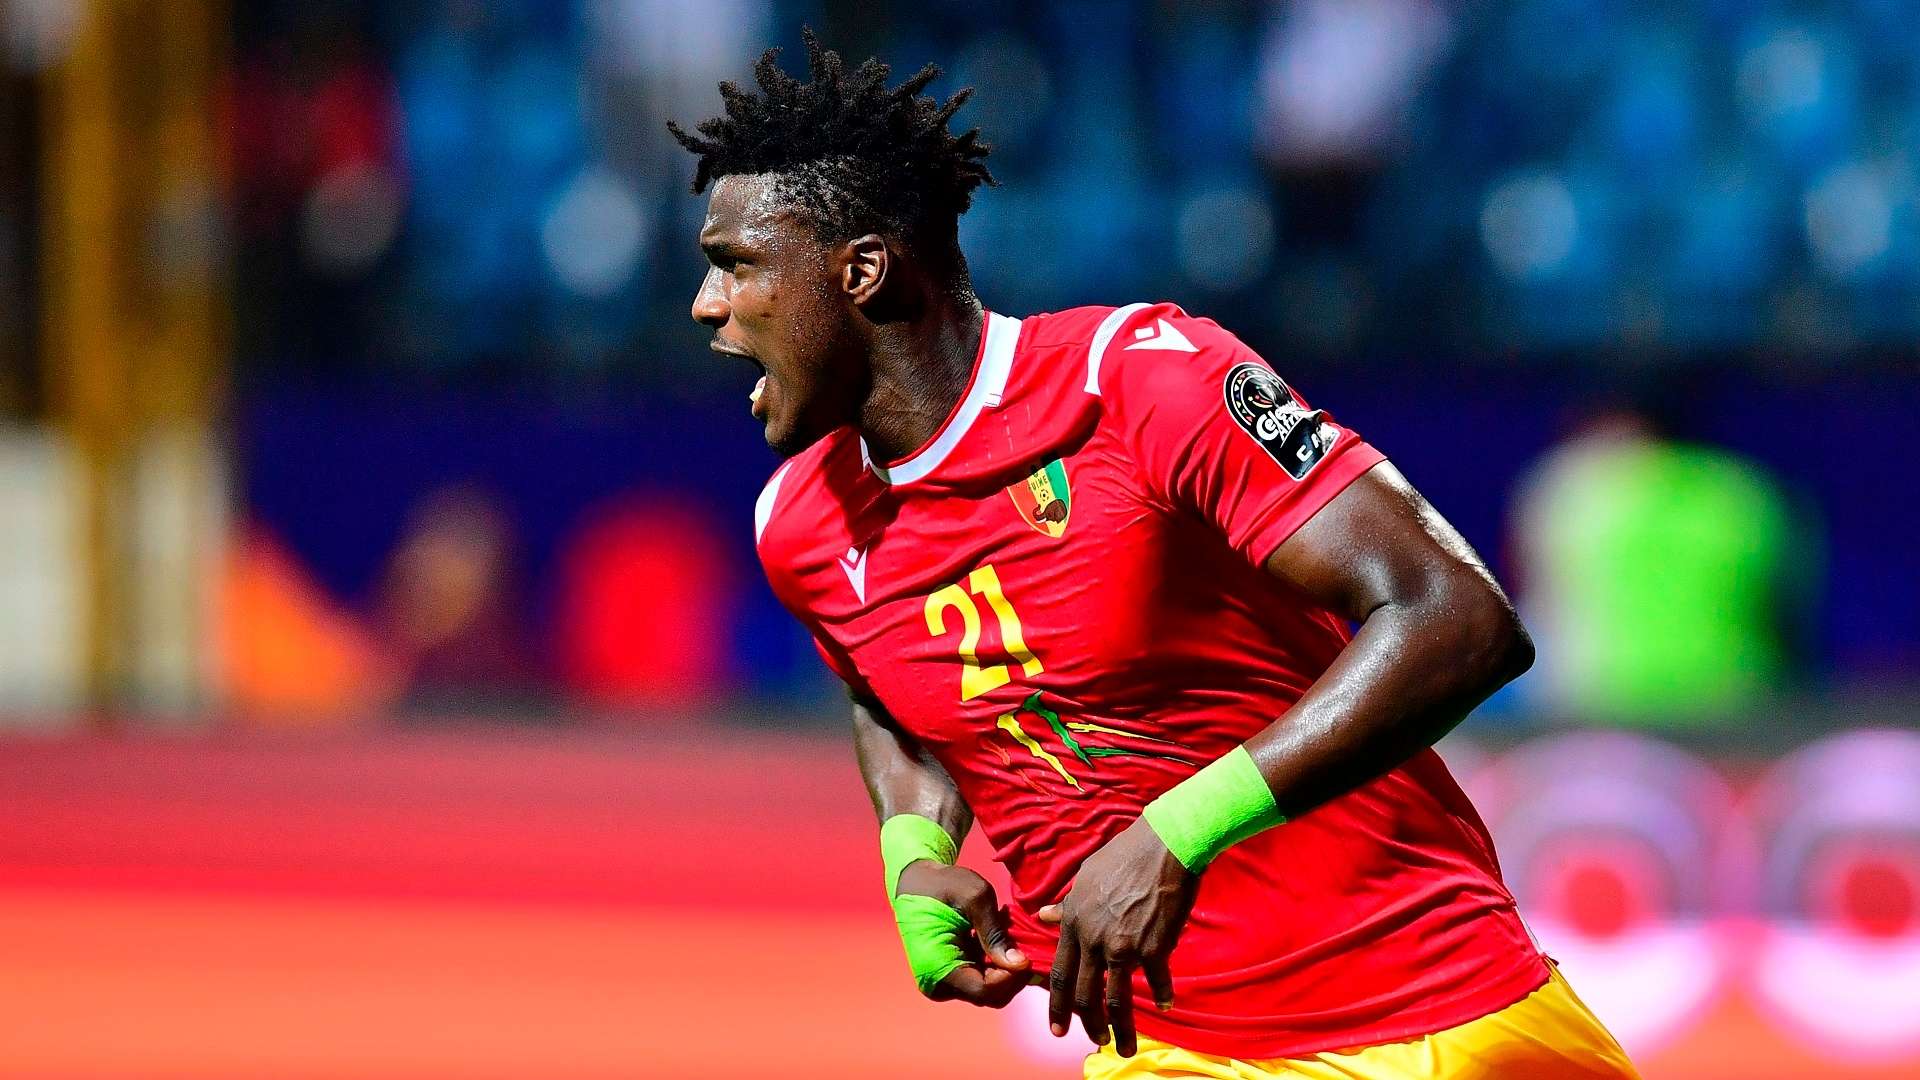 Guinea's forward Sory Kaba celebrates his goal during the 2019 Africa Cup of Nations